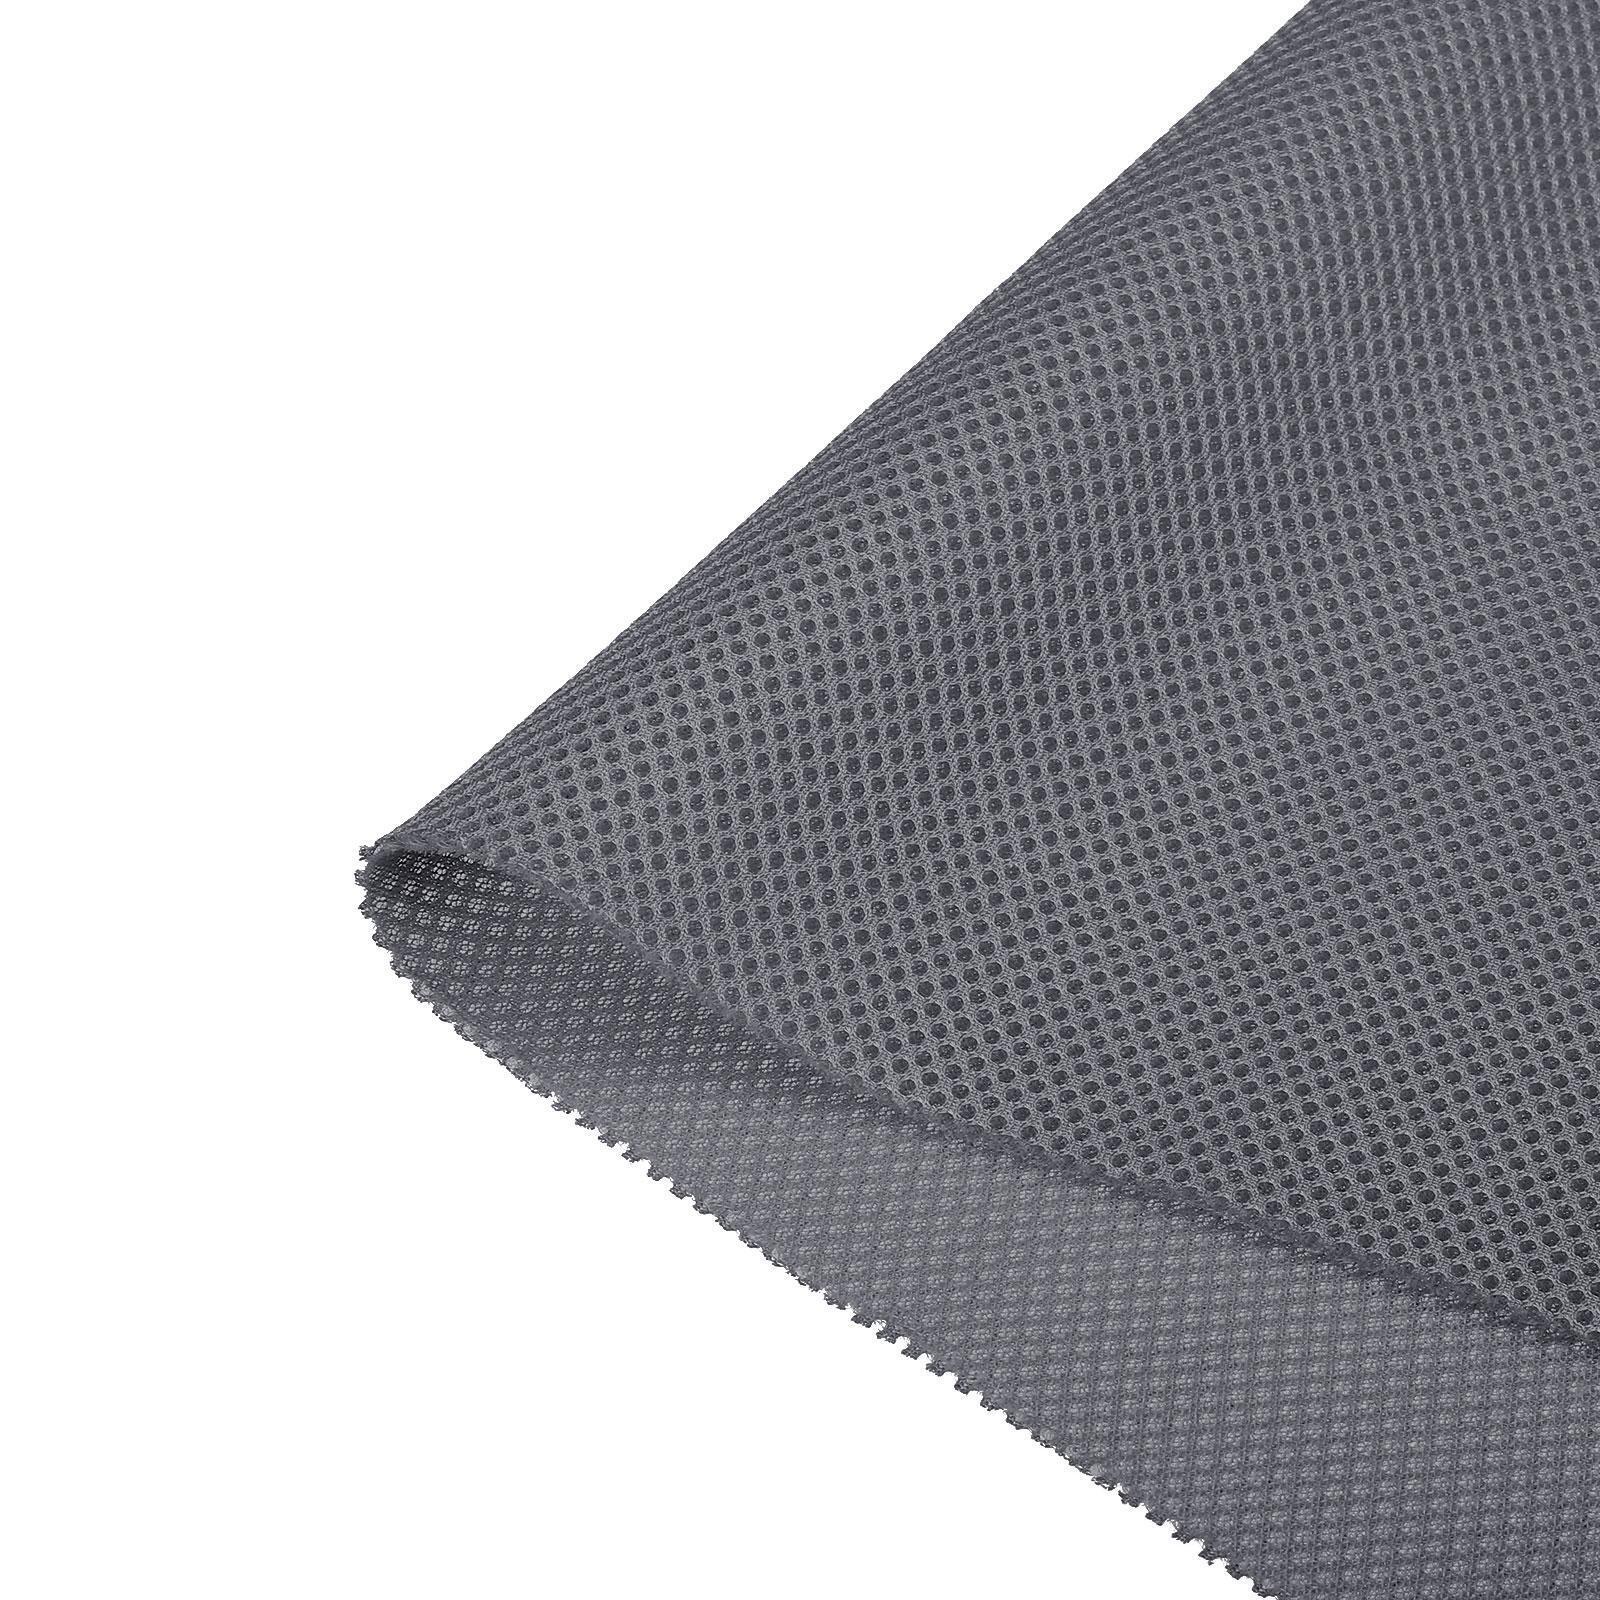 Speaker Grill Cloth 20 X 55 Inch Stereo Mesh Fabric Cloth For Speaker Grey